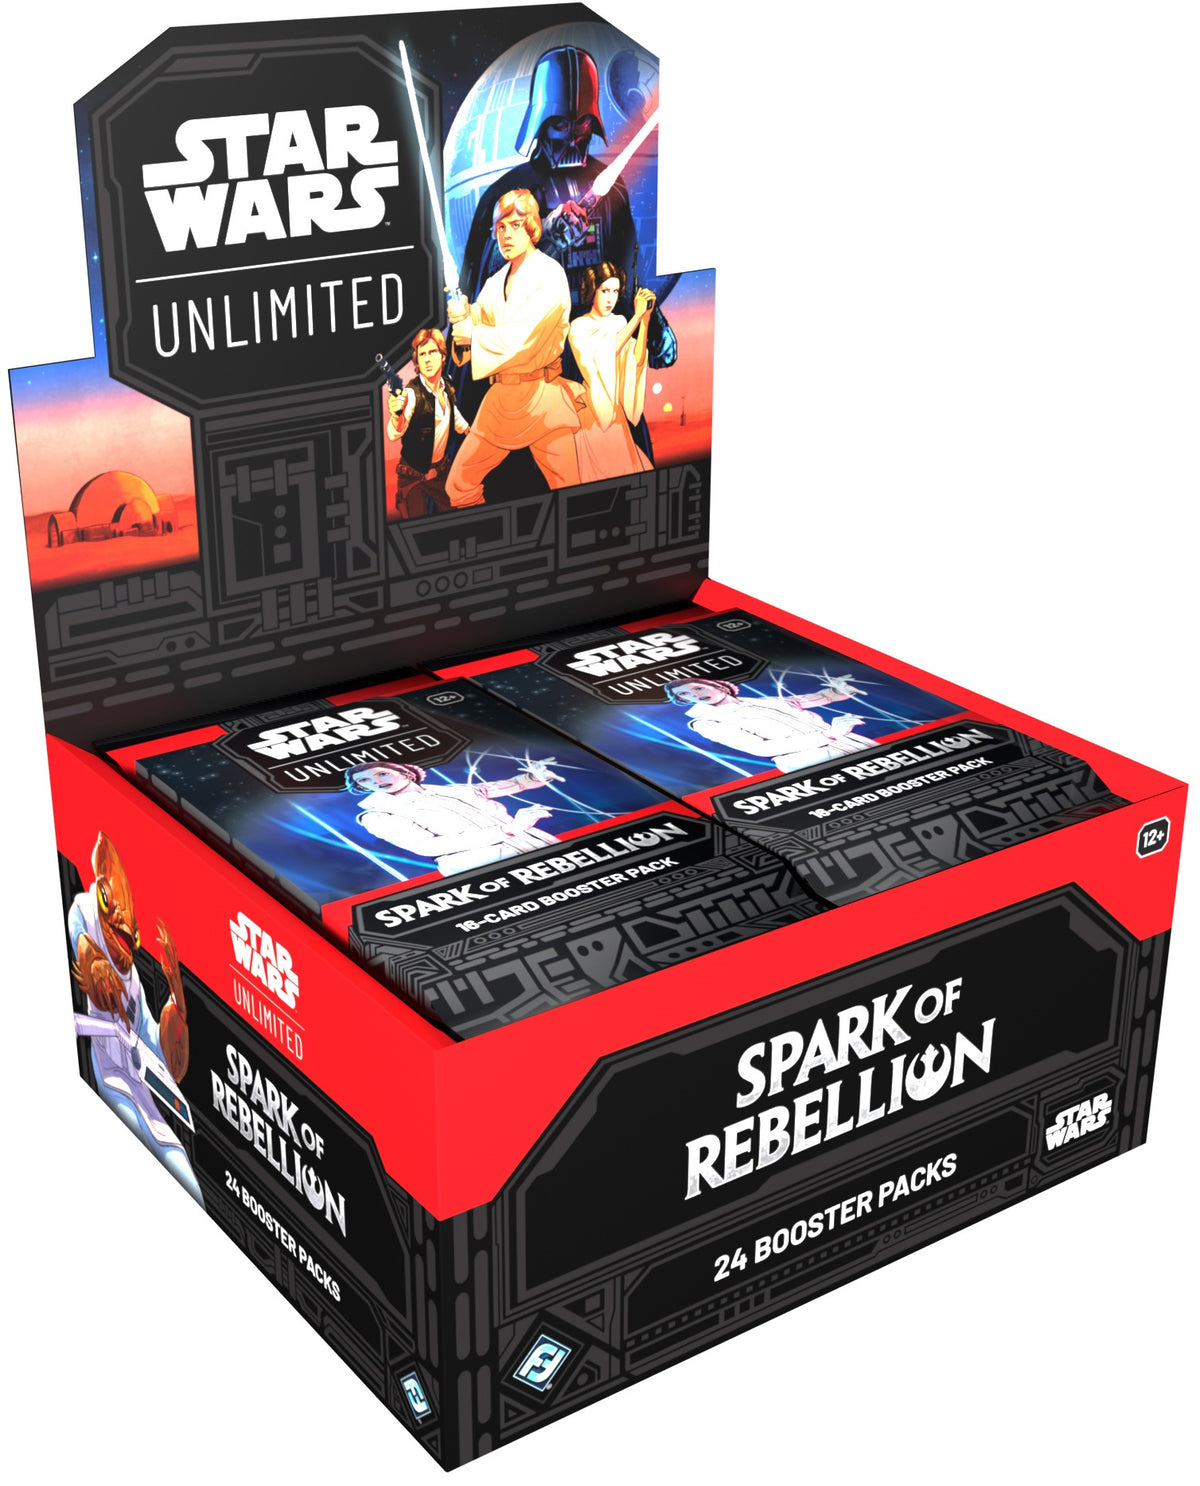 Star Wars: Unlimited - Spark of Rebellion (24 Booster Pack Display)